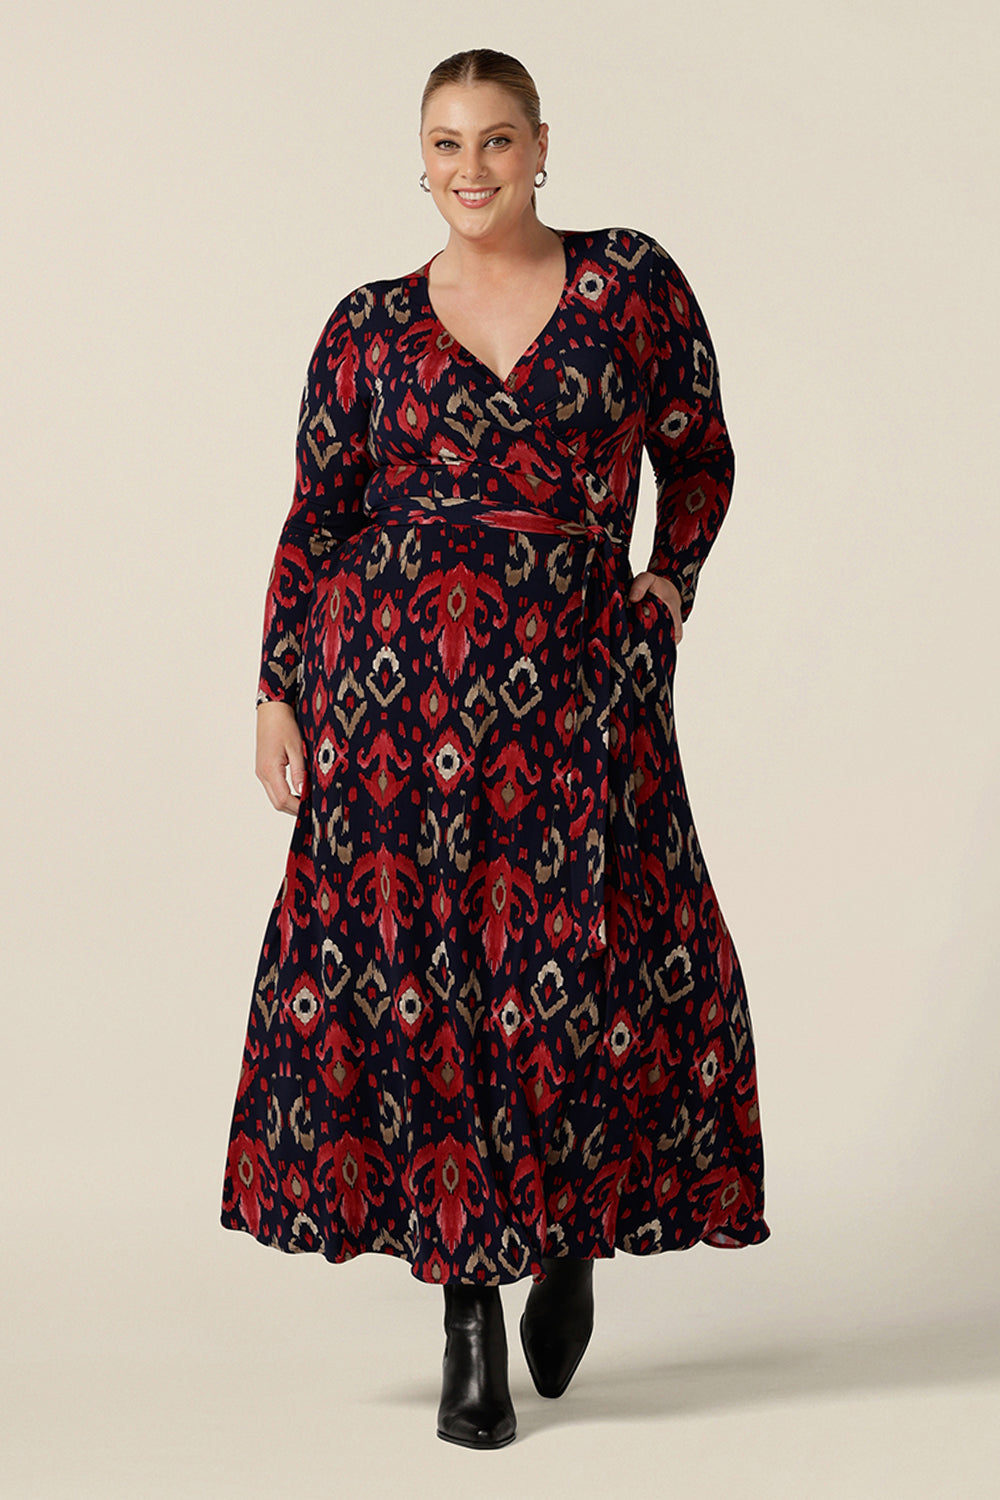 A great maxi dress for plus size women, the Kimberly Maxi Dress in Ikat red and navy print, is a full length jersey wrap dress with long sleeves. Shown on a size 18 woman, this maxi dress is made in Australia in sizes 8 to 24.